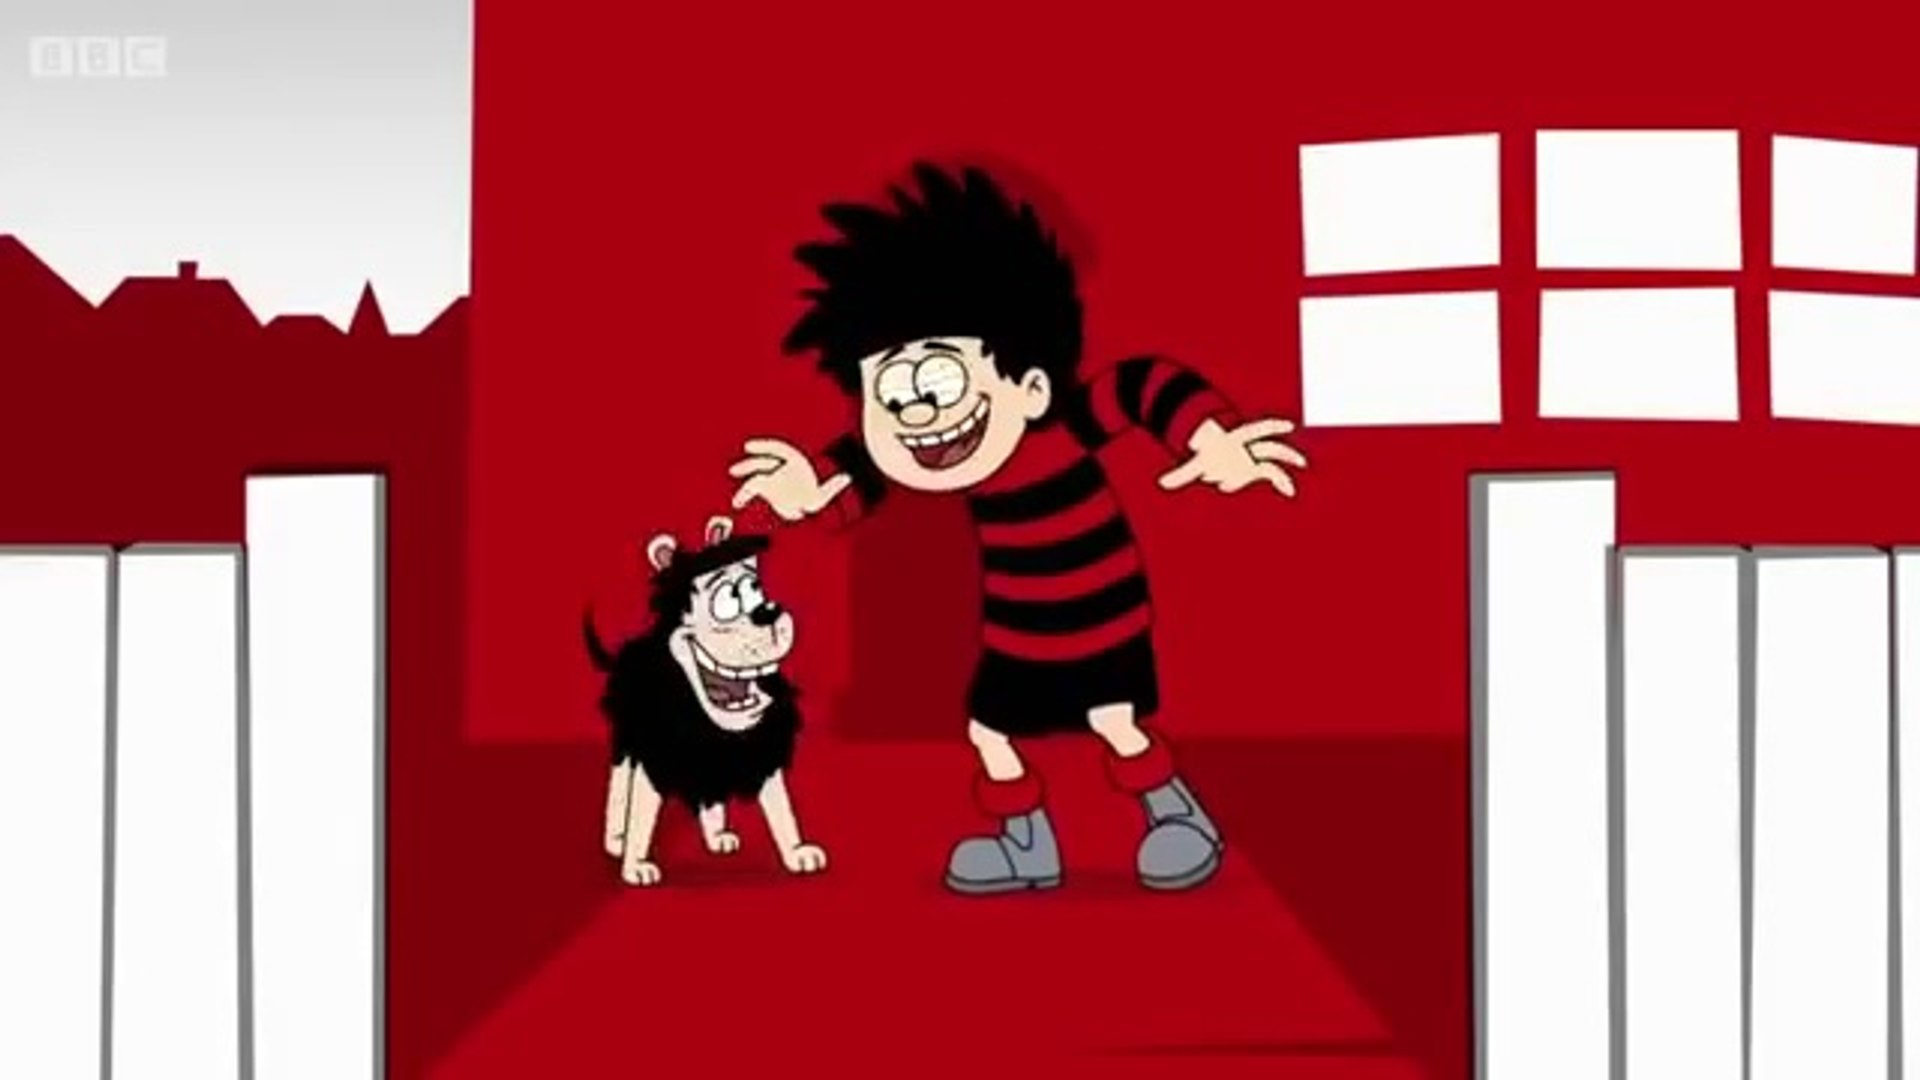 Dennis the Menace and Gnasher. Mike the Menace. Dennis the Menace movie. Dennis the Menace Macabre. Show me a reason denis the menace